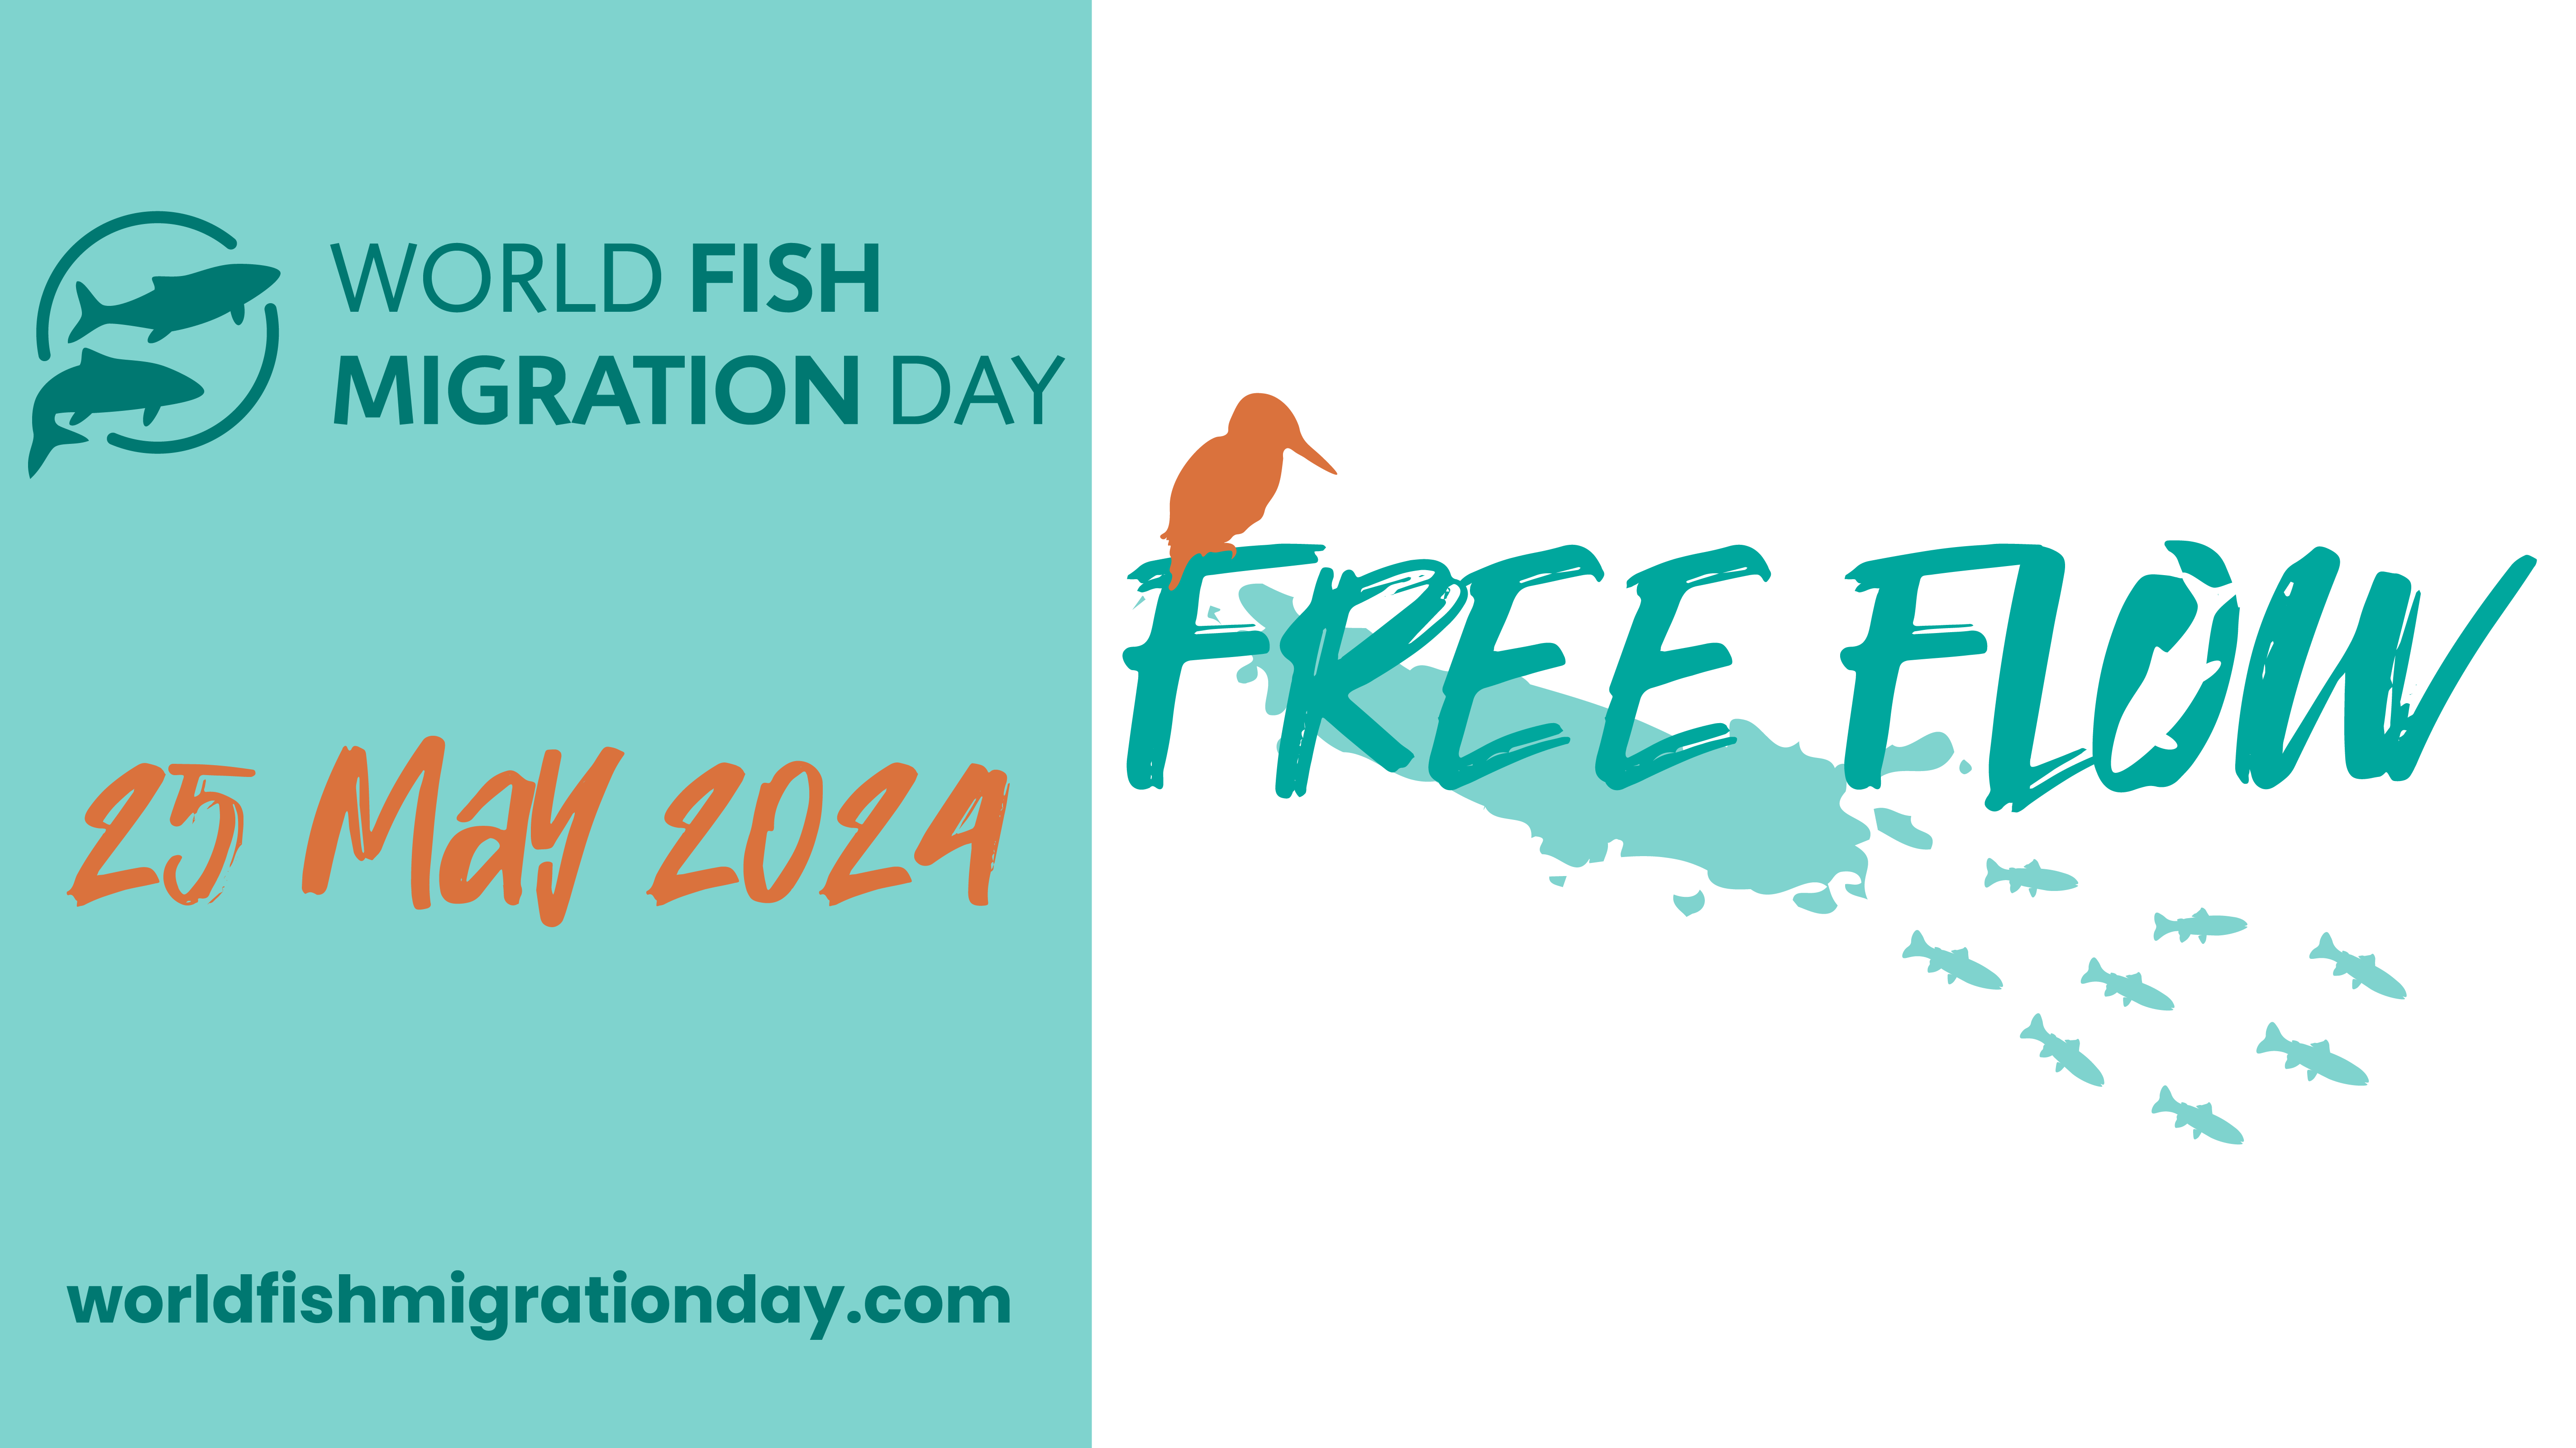 Watch our film for World Fish Migration Day